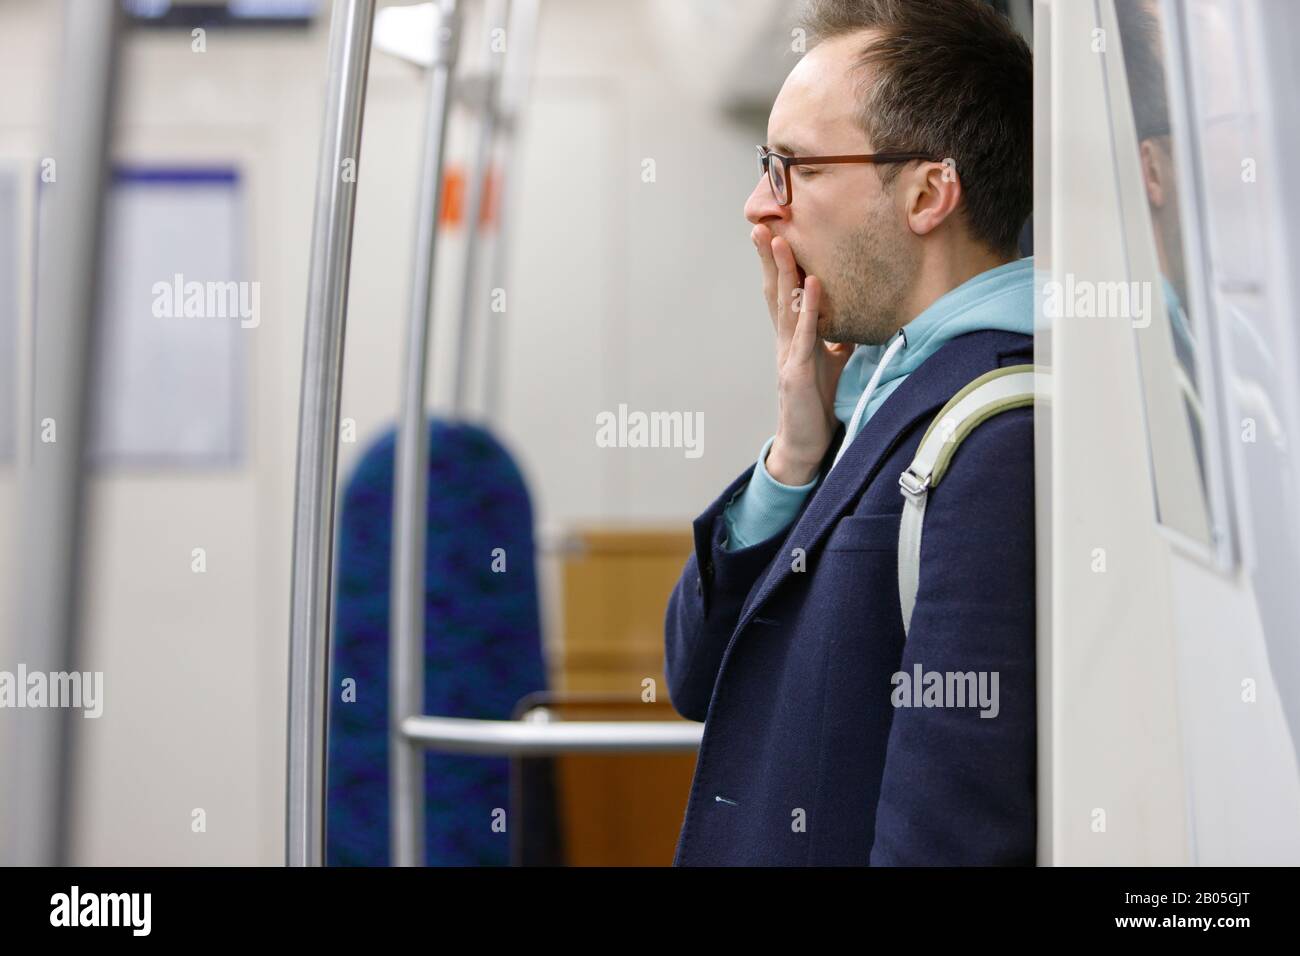 Tired man in eyeglasses in public transportation. Young exhausted male standing and yawning in subway, sleepy after work goes home, blurred background Stock Photo